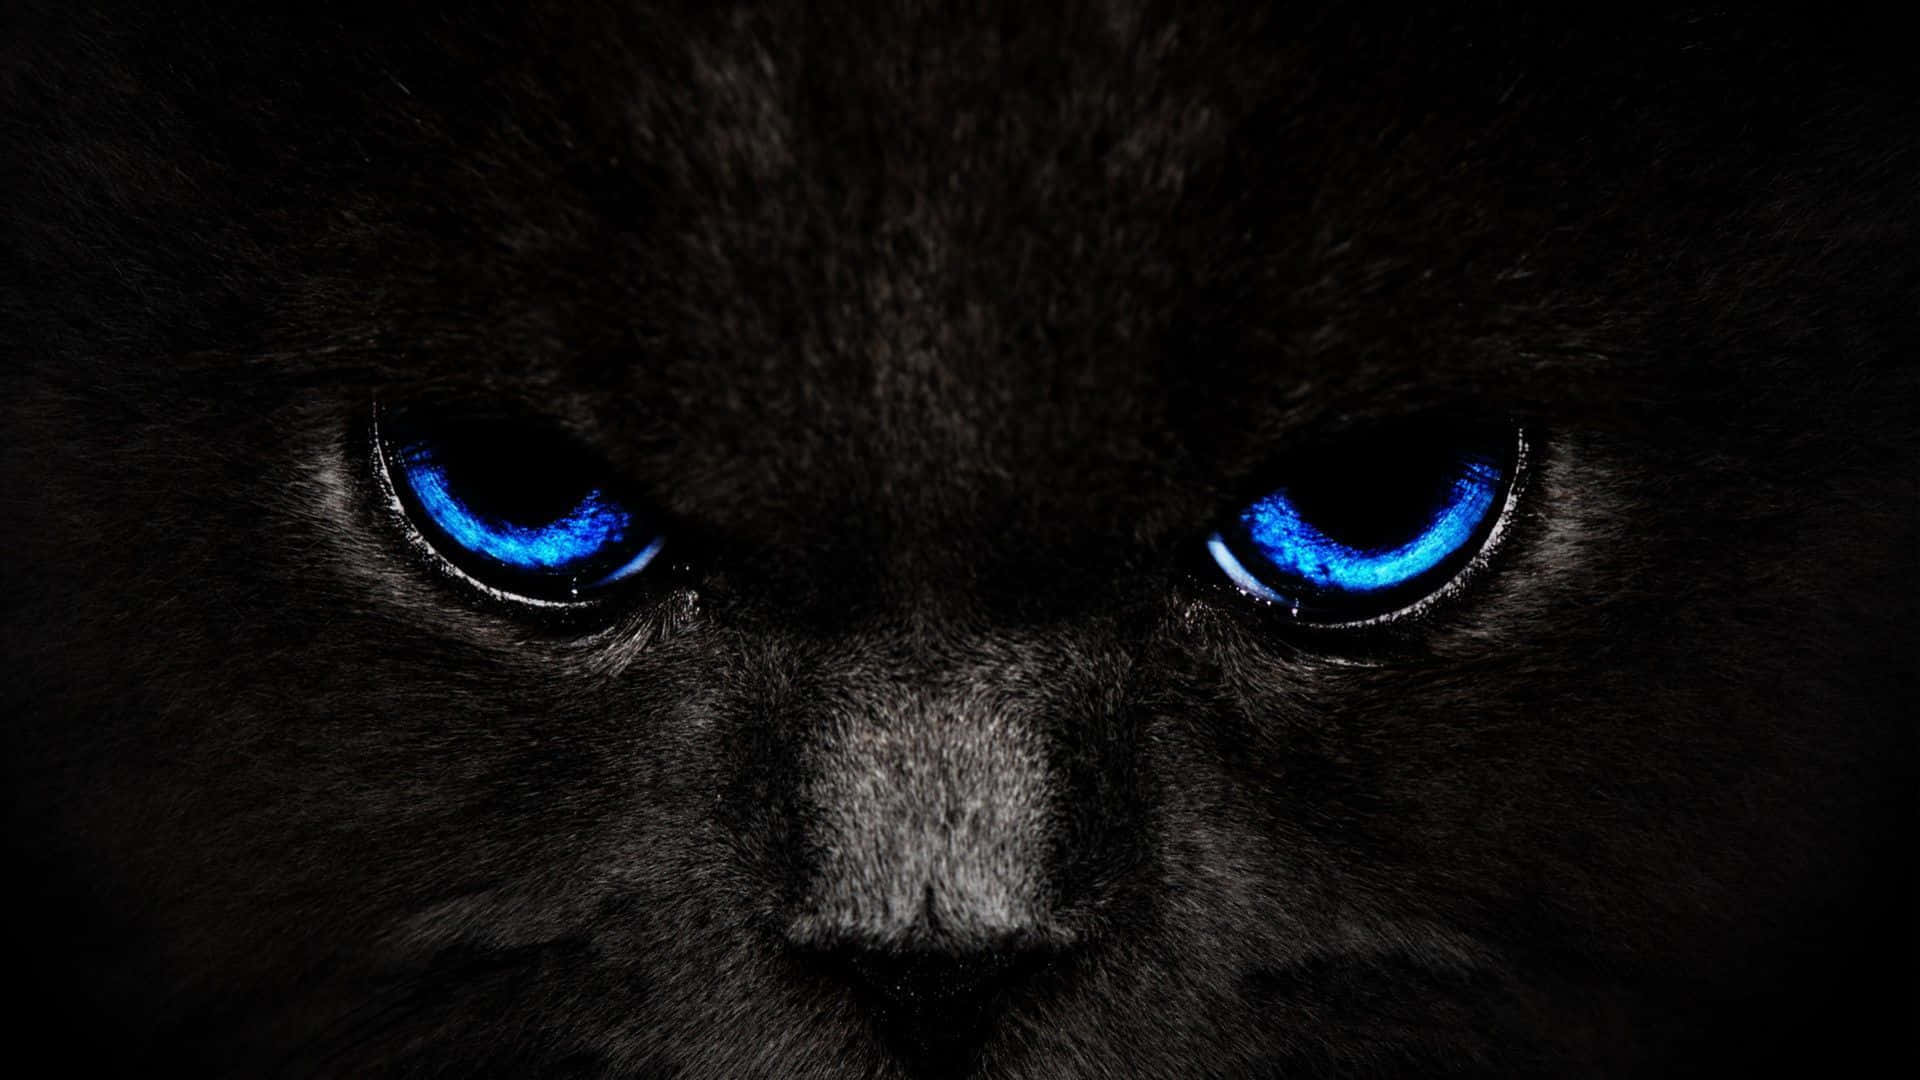 A Black Cat With Blue Eyes In The Dark Wallpaper